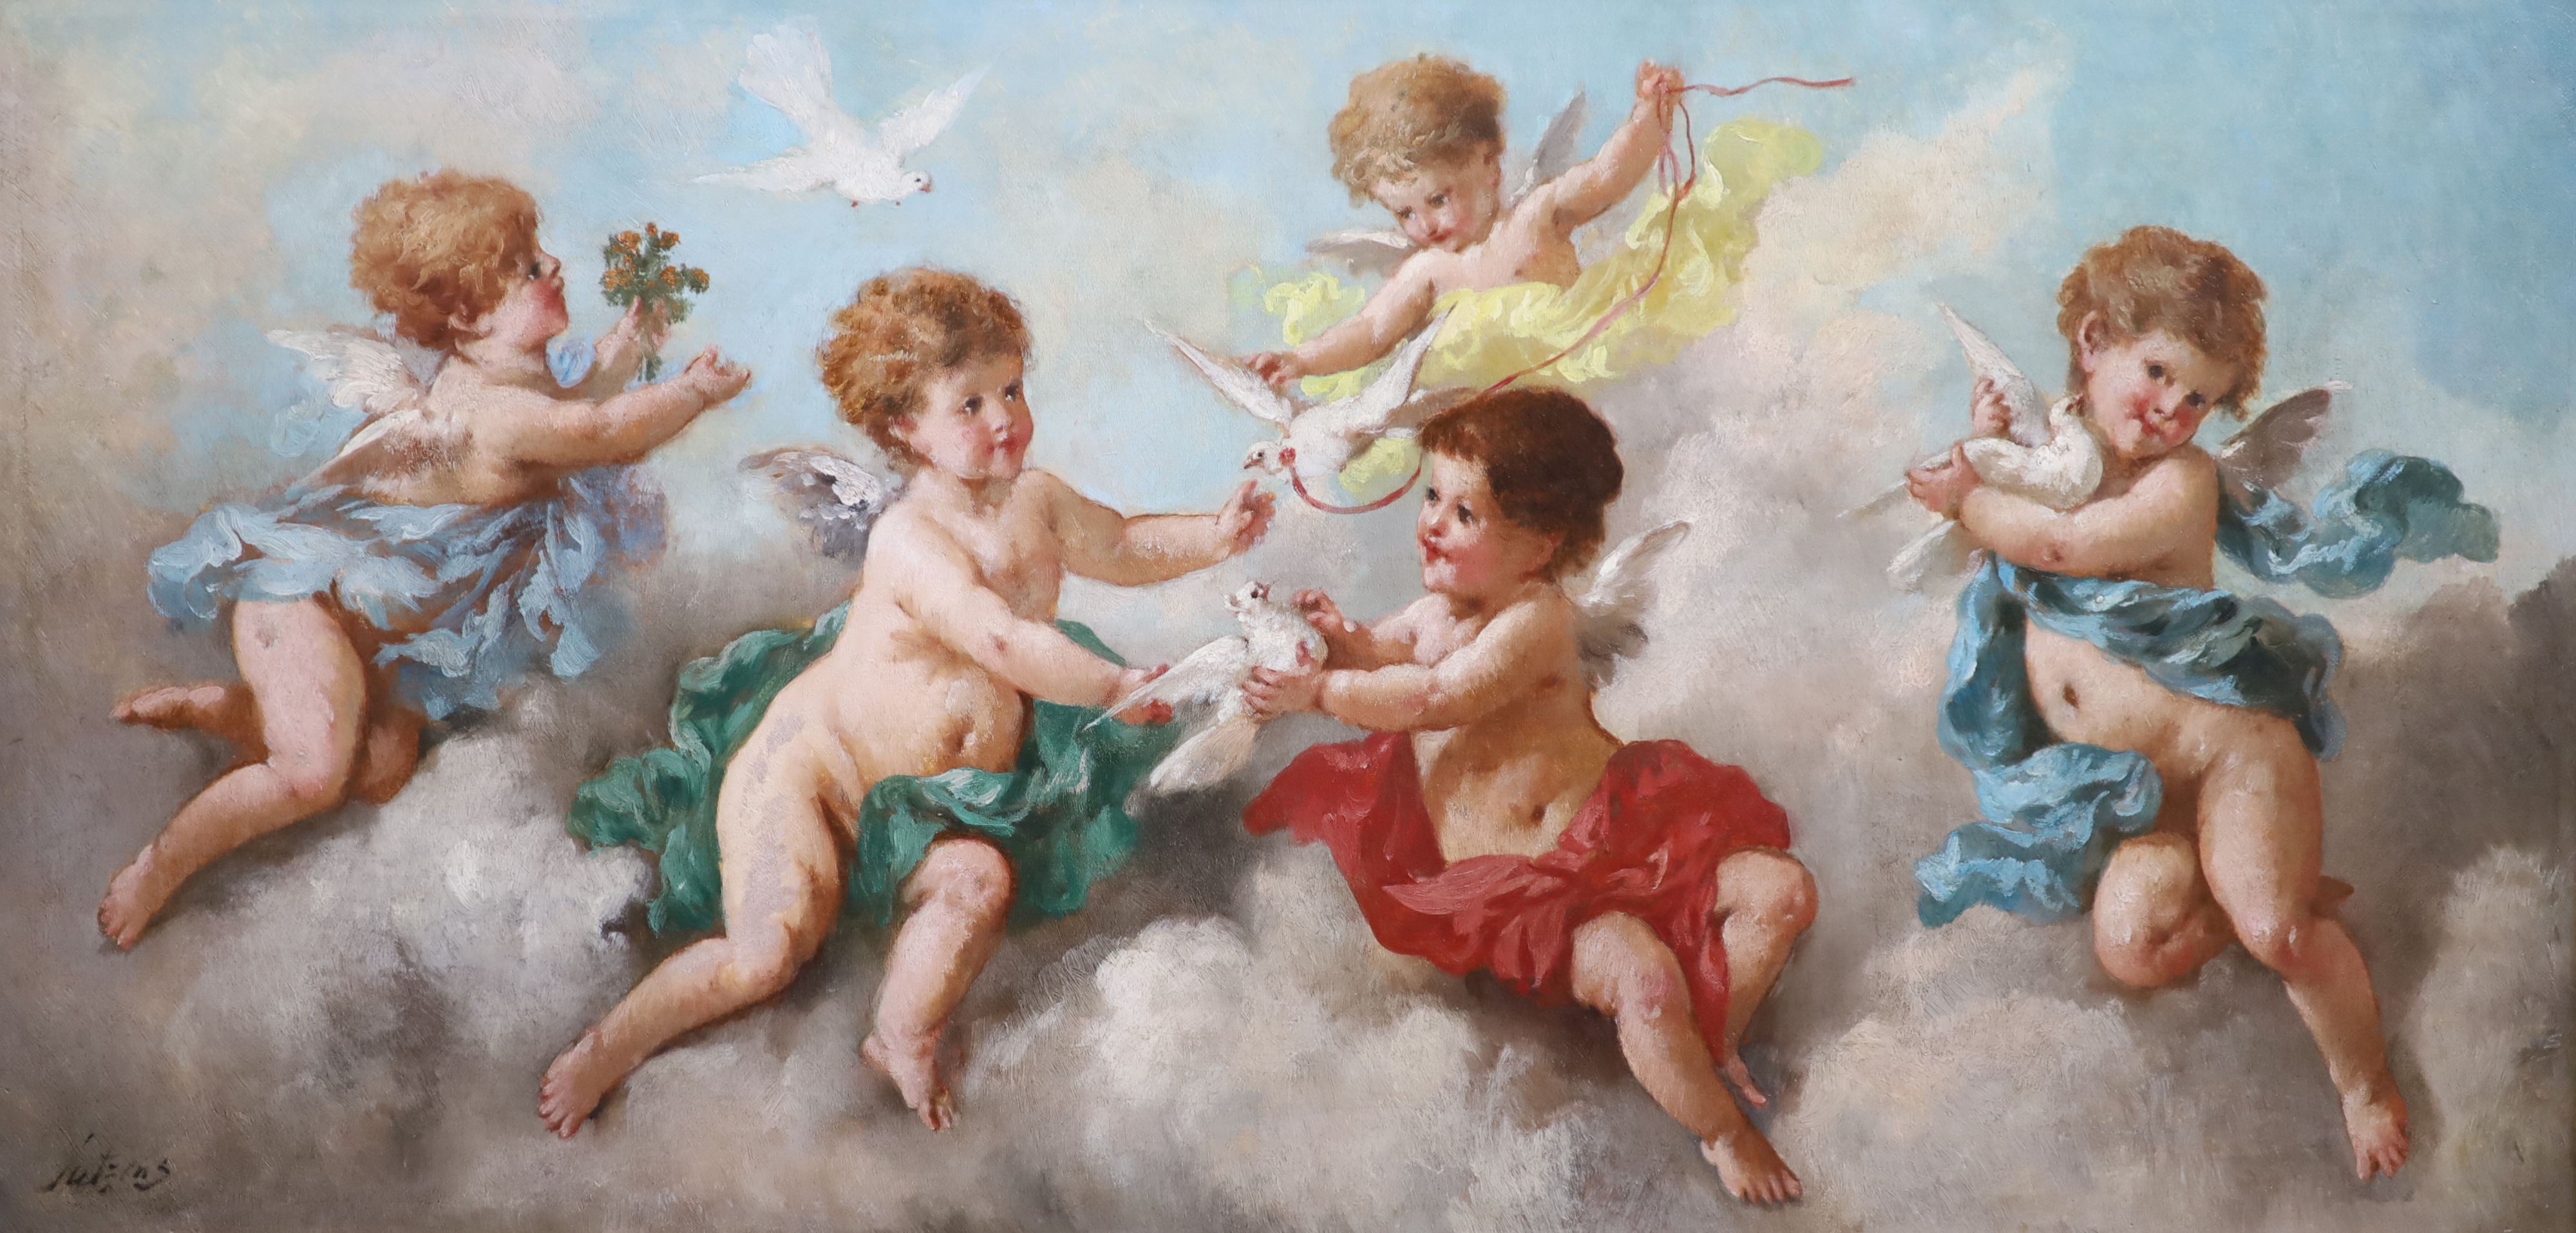 Charles Augustus Henry Lutyens (1829-1915), Amorini and doves amongst clouds, pair of oils on canvas, 44 x 90cm